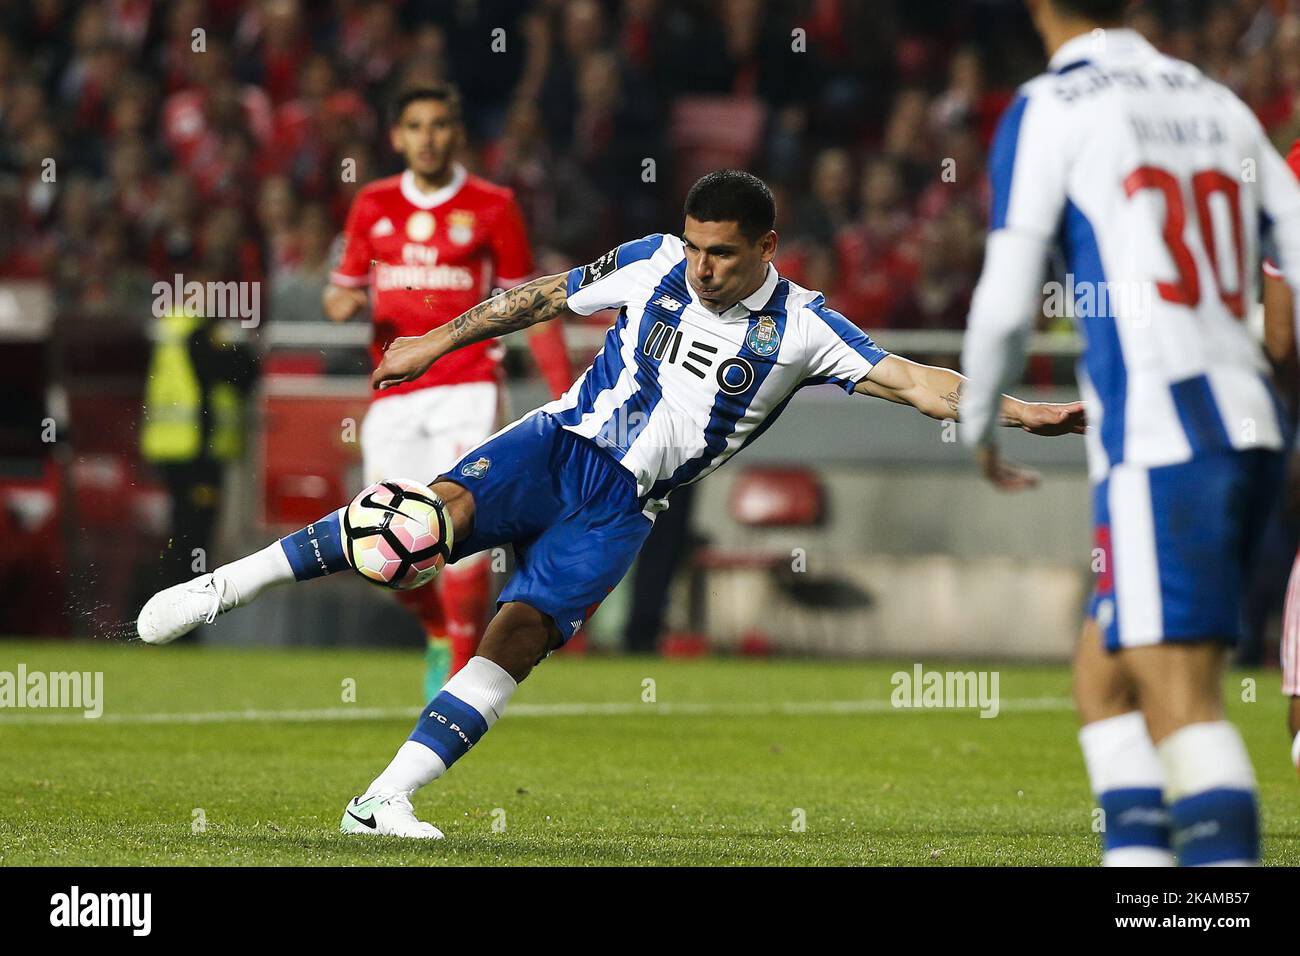 Porto's defender Maxi Pereira scores his team's goal during Premier League 2016/17 match between SL Benfica vs FC Porto, in Lisbon, on April 1, 2017. (Photo by Carlos Palma/NurPhoto) *** Please Use Credit from Credit Field *** Stock Photo